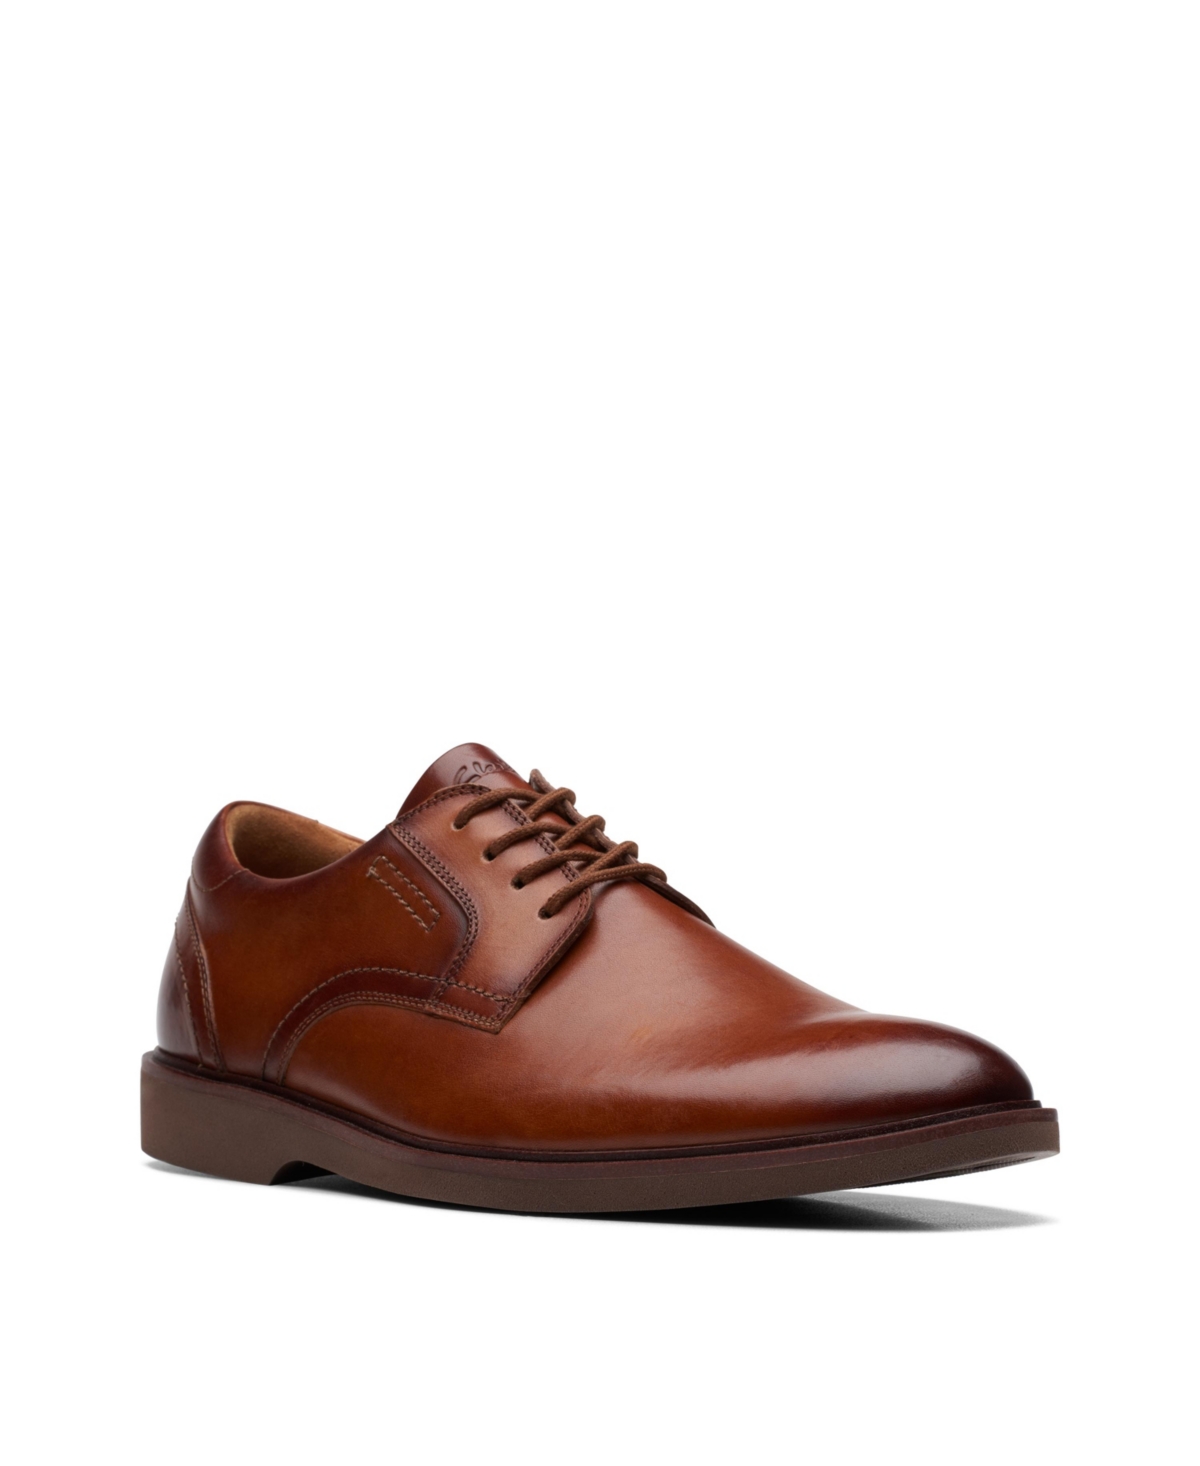 Men's Collection Malwood Lace Shoes - Tan Leather